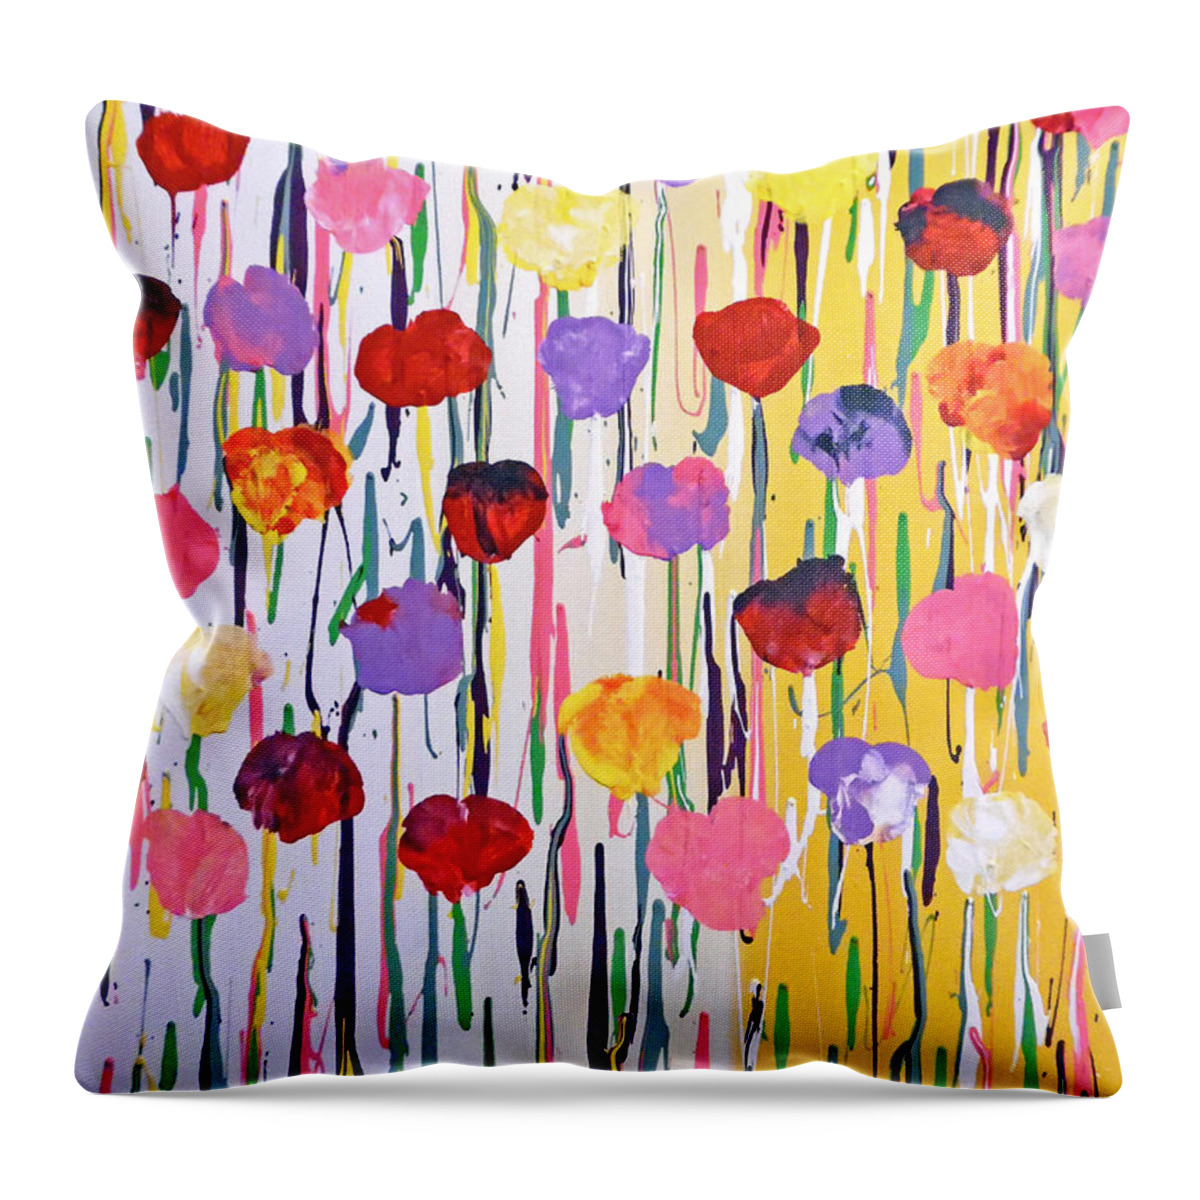 Neon Flowers Throw Pillow featuring the painting Bleeding Tulips by Jilian Cramb - AMothersFineArt